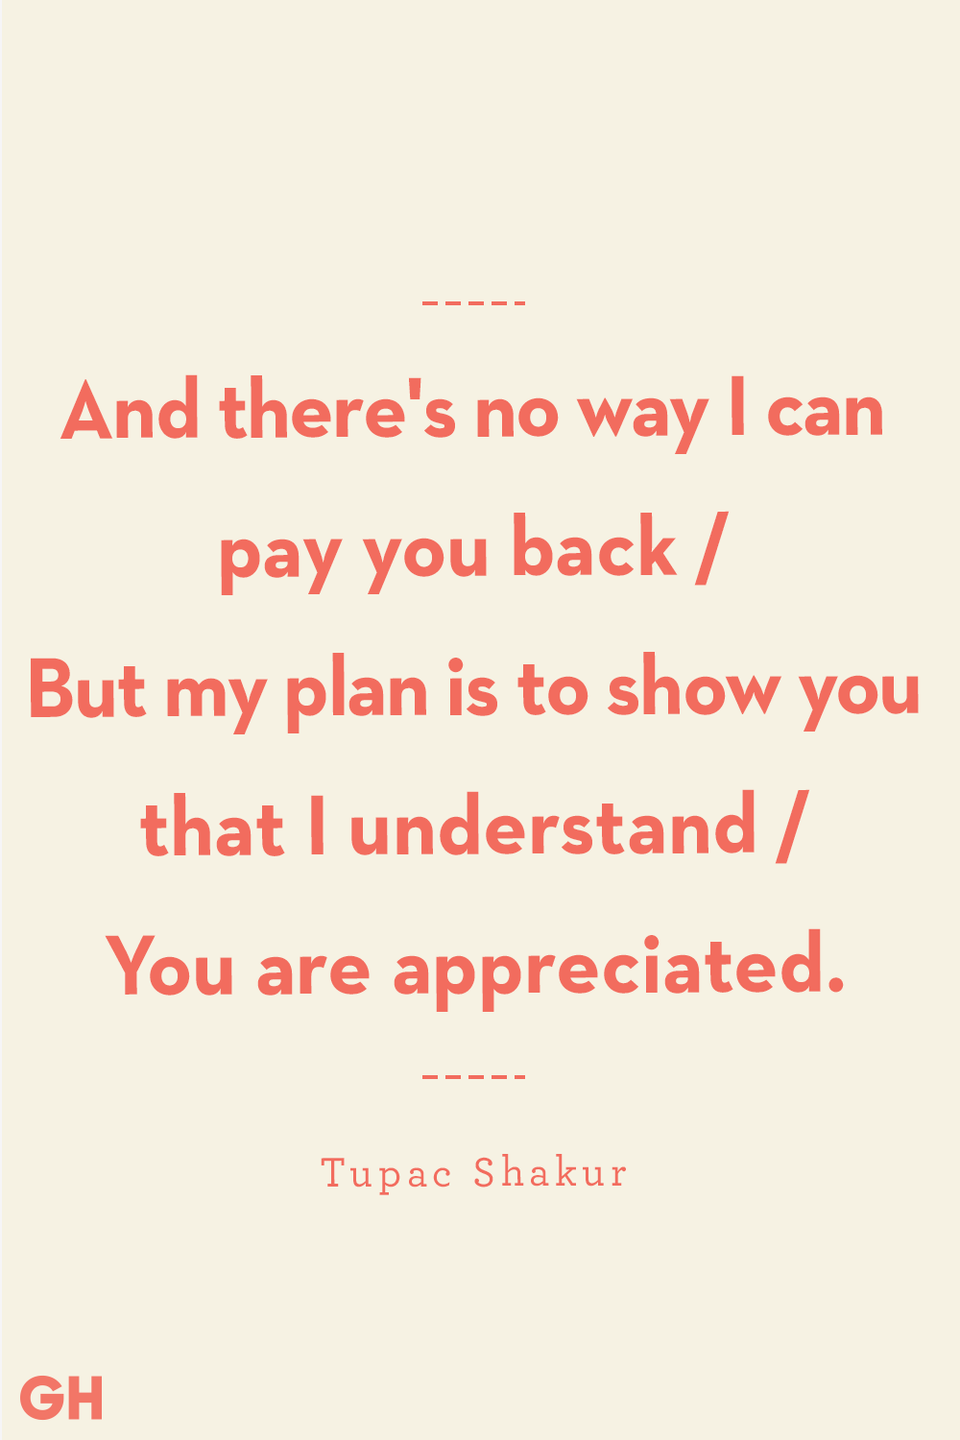 <p>And there's no way I can pay you back / But my plan is to show you that I understand / You are appreciated.</p>